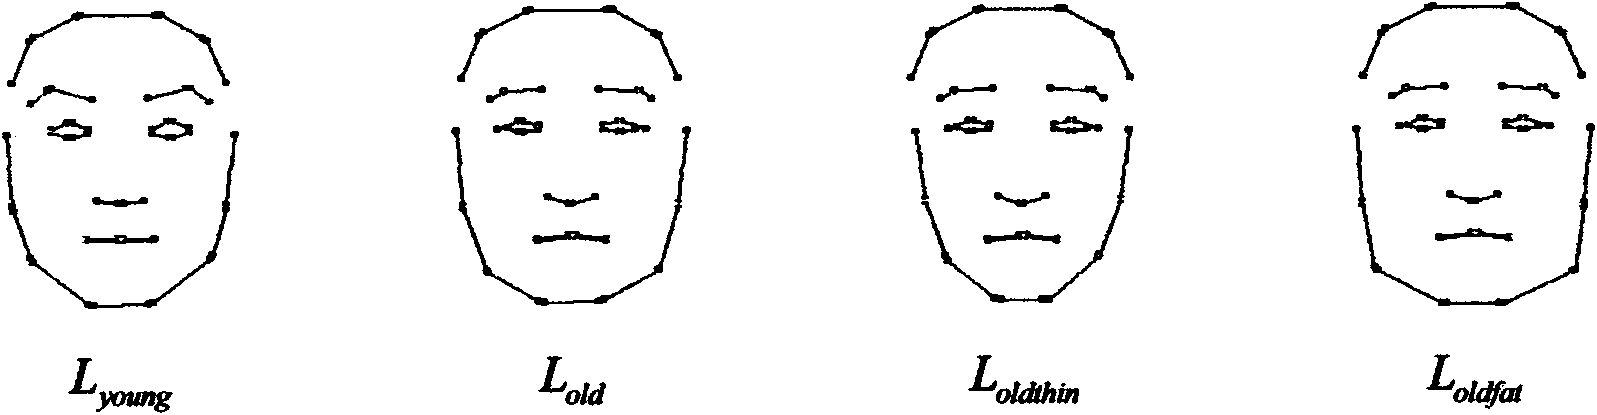 Human face image age changing method based on average face and aging scale map